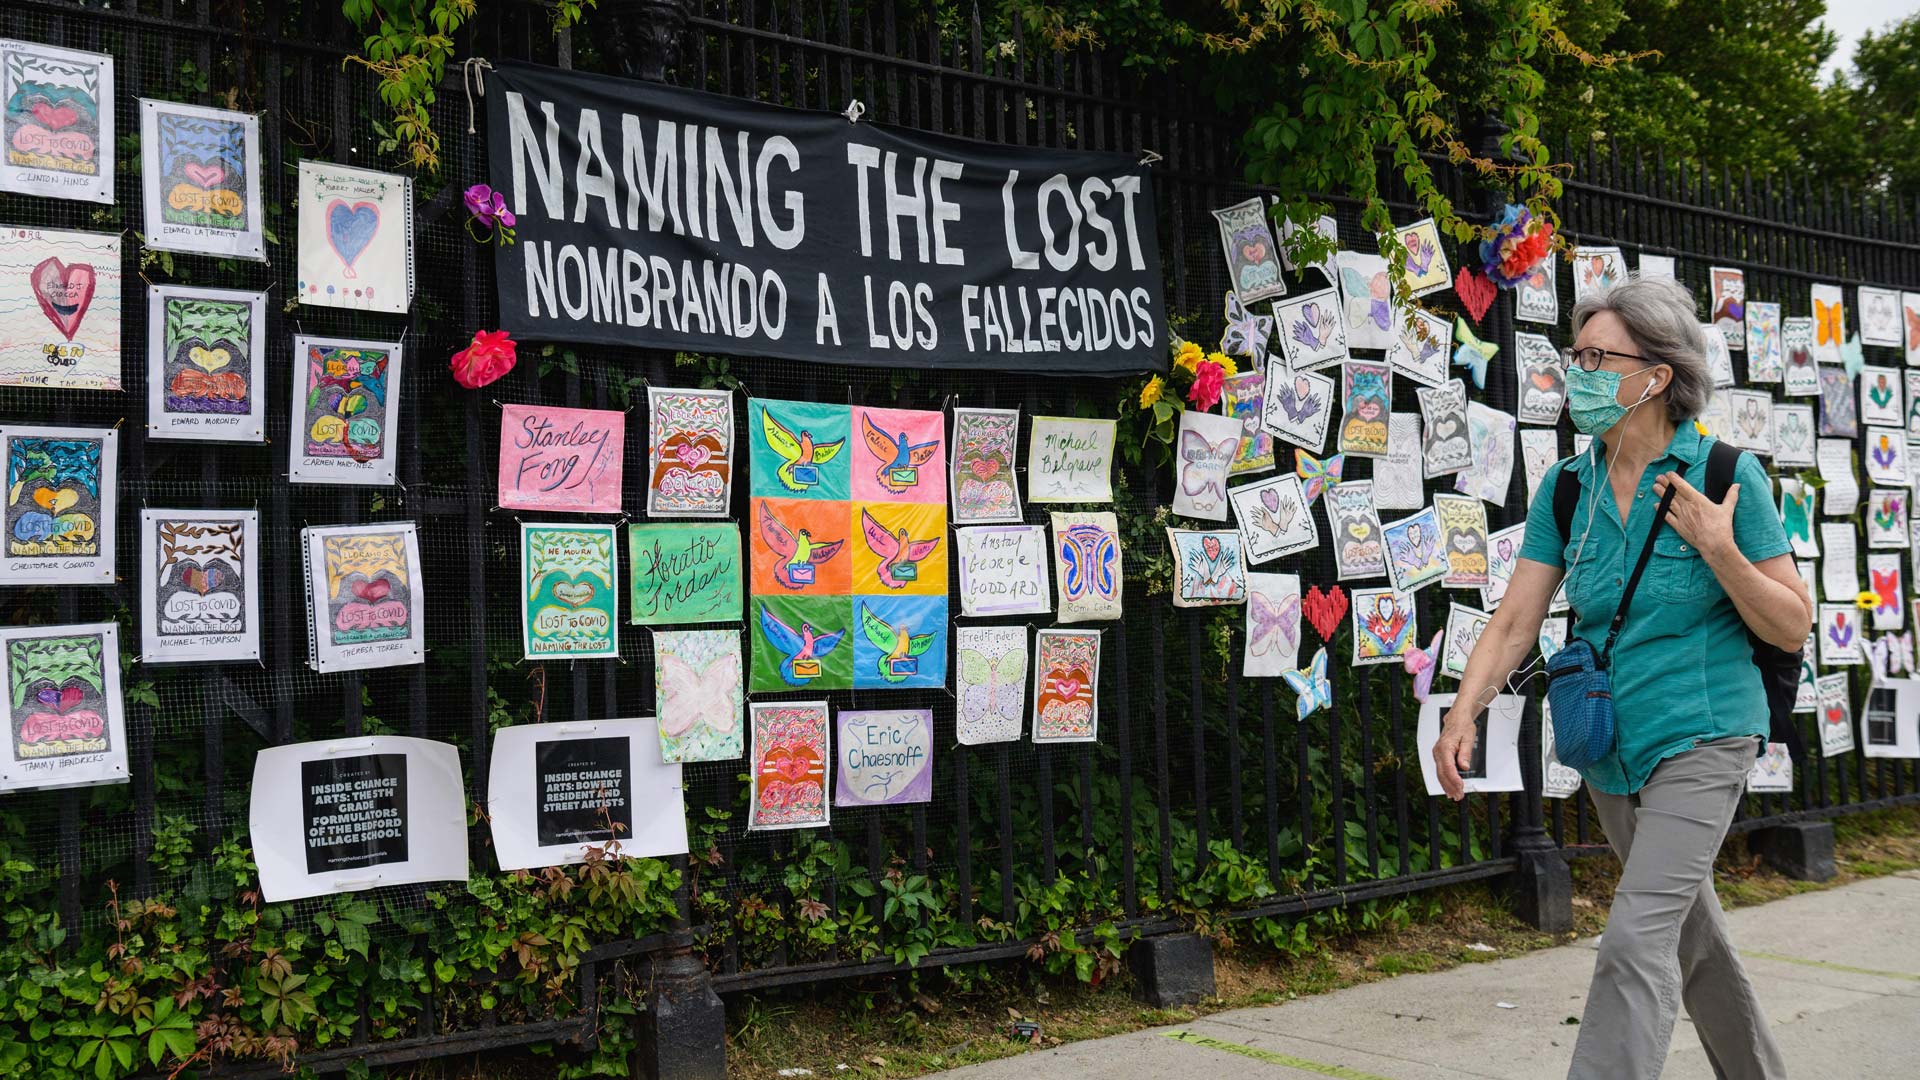 A memorial for those lost to covid-19 in Brooklyn. (Photo: Angela Weiss / AFP, Getty Images)